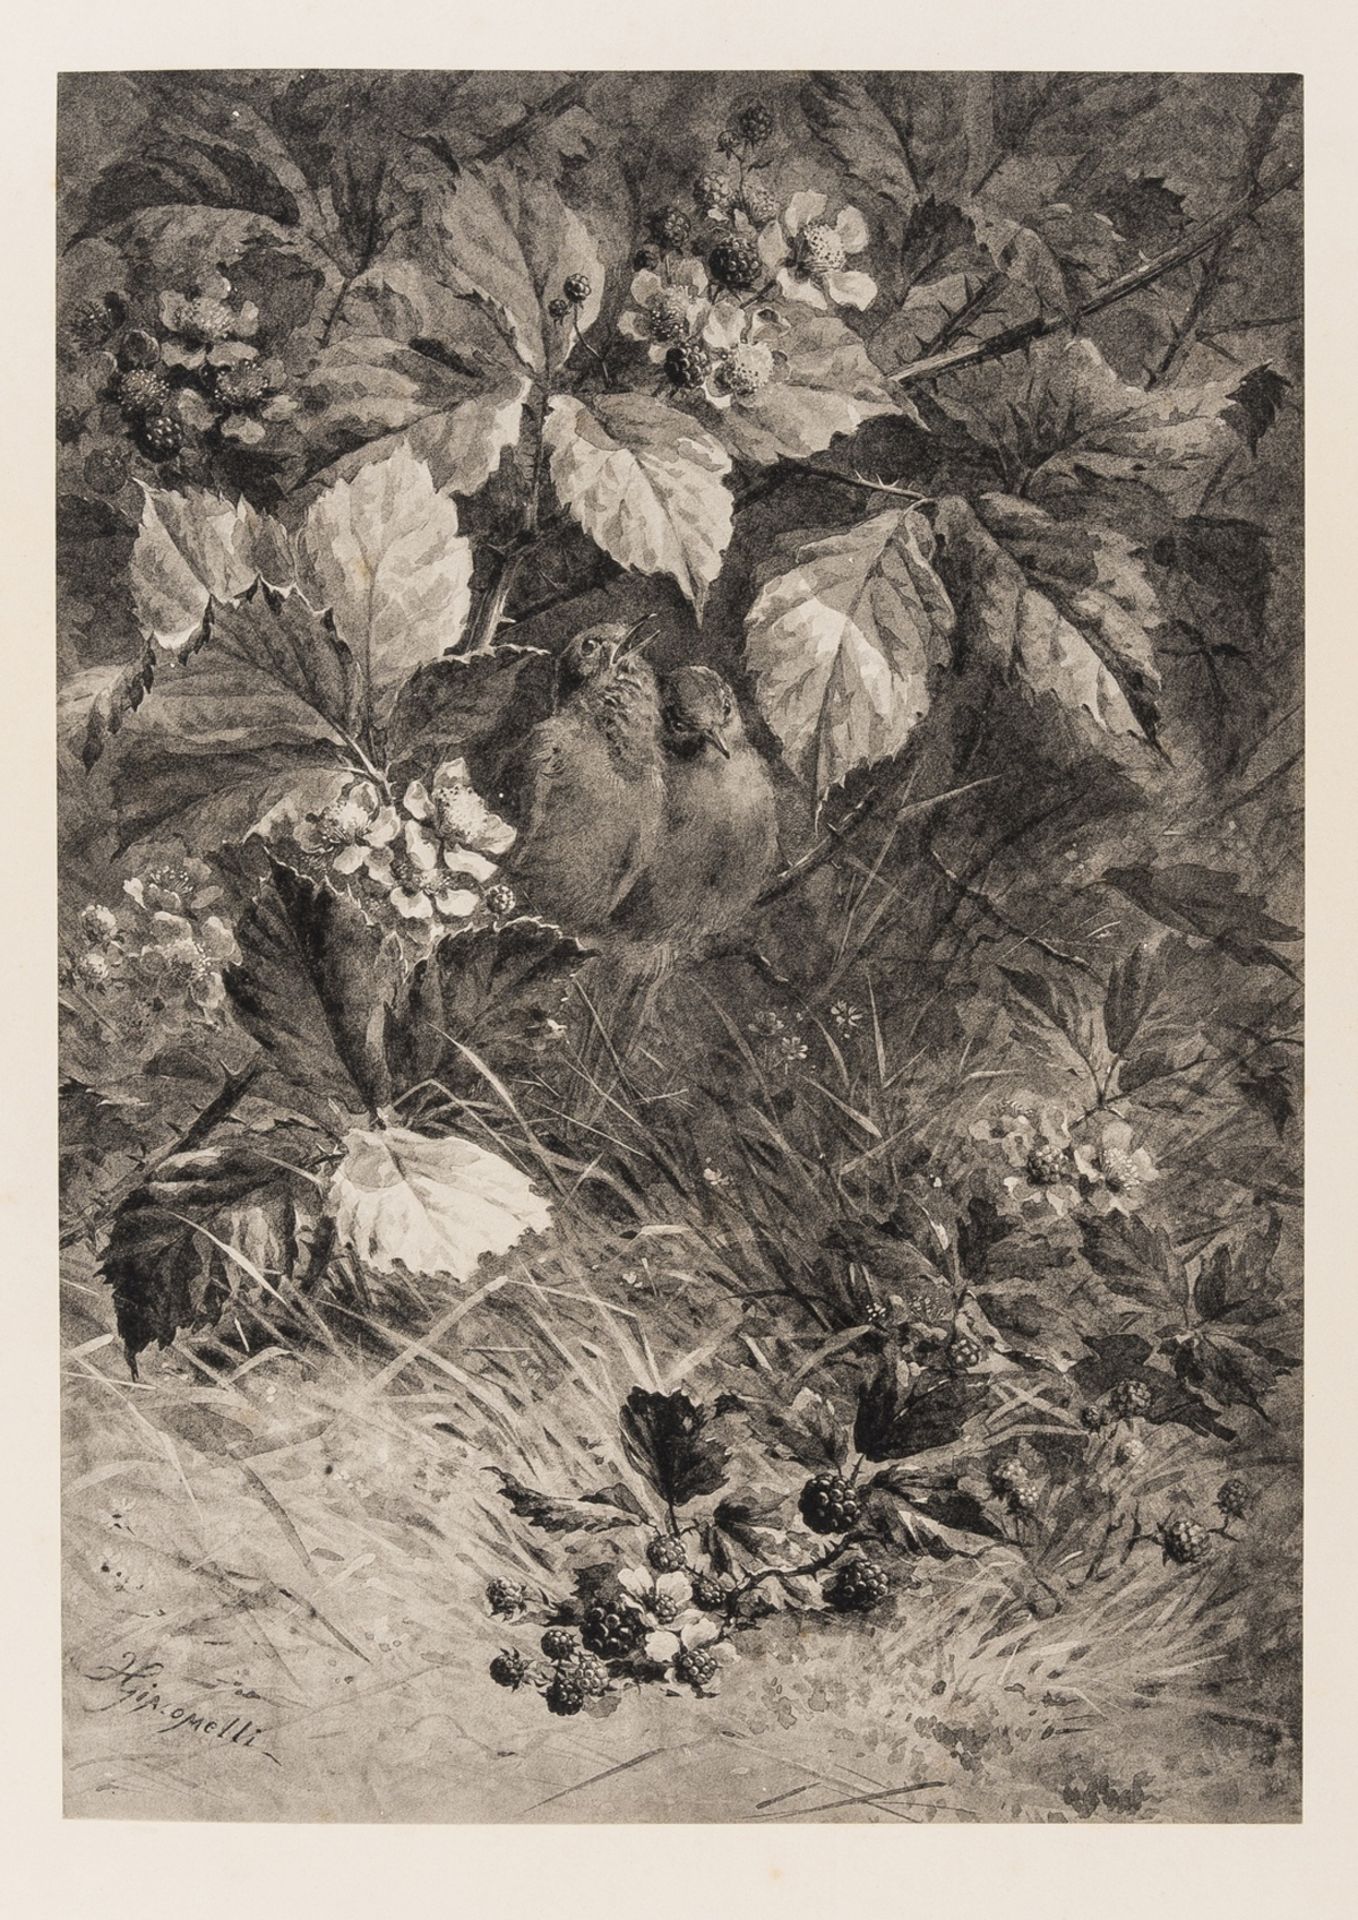 Birds.- Giacomelli (H.) [Birds and Flowers], 1880.